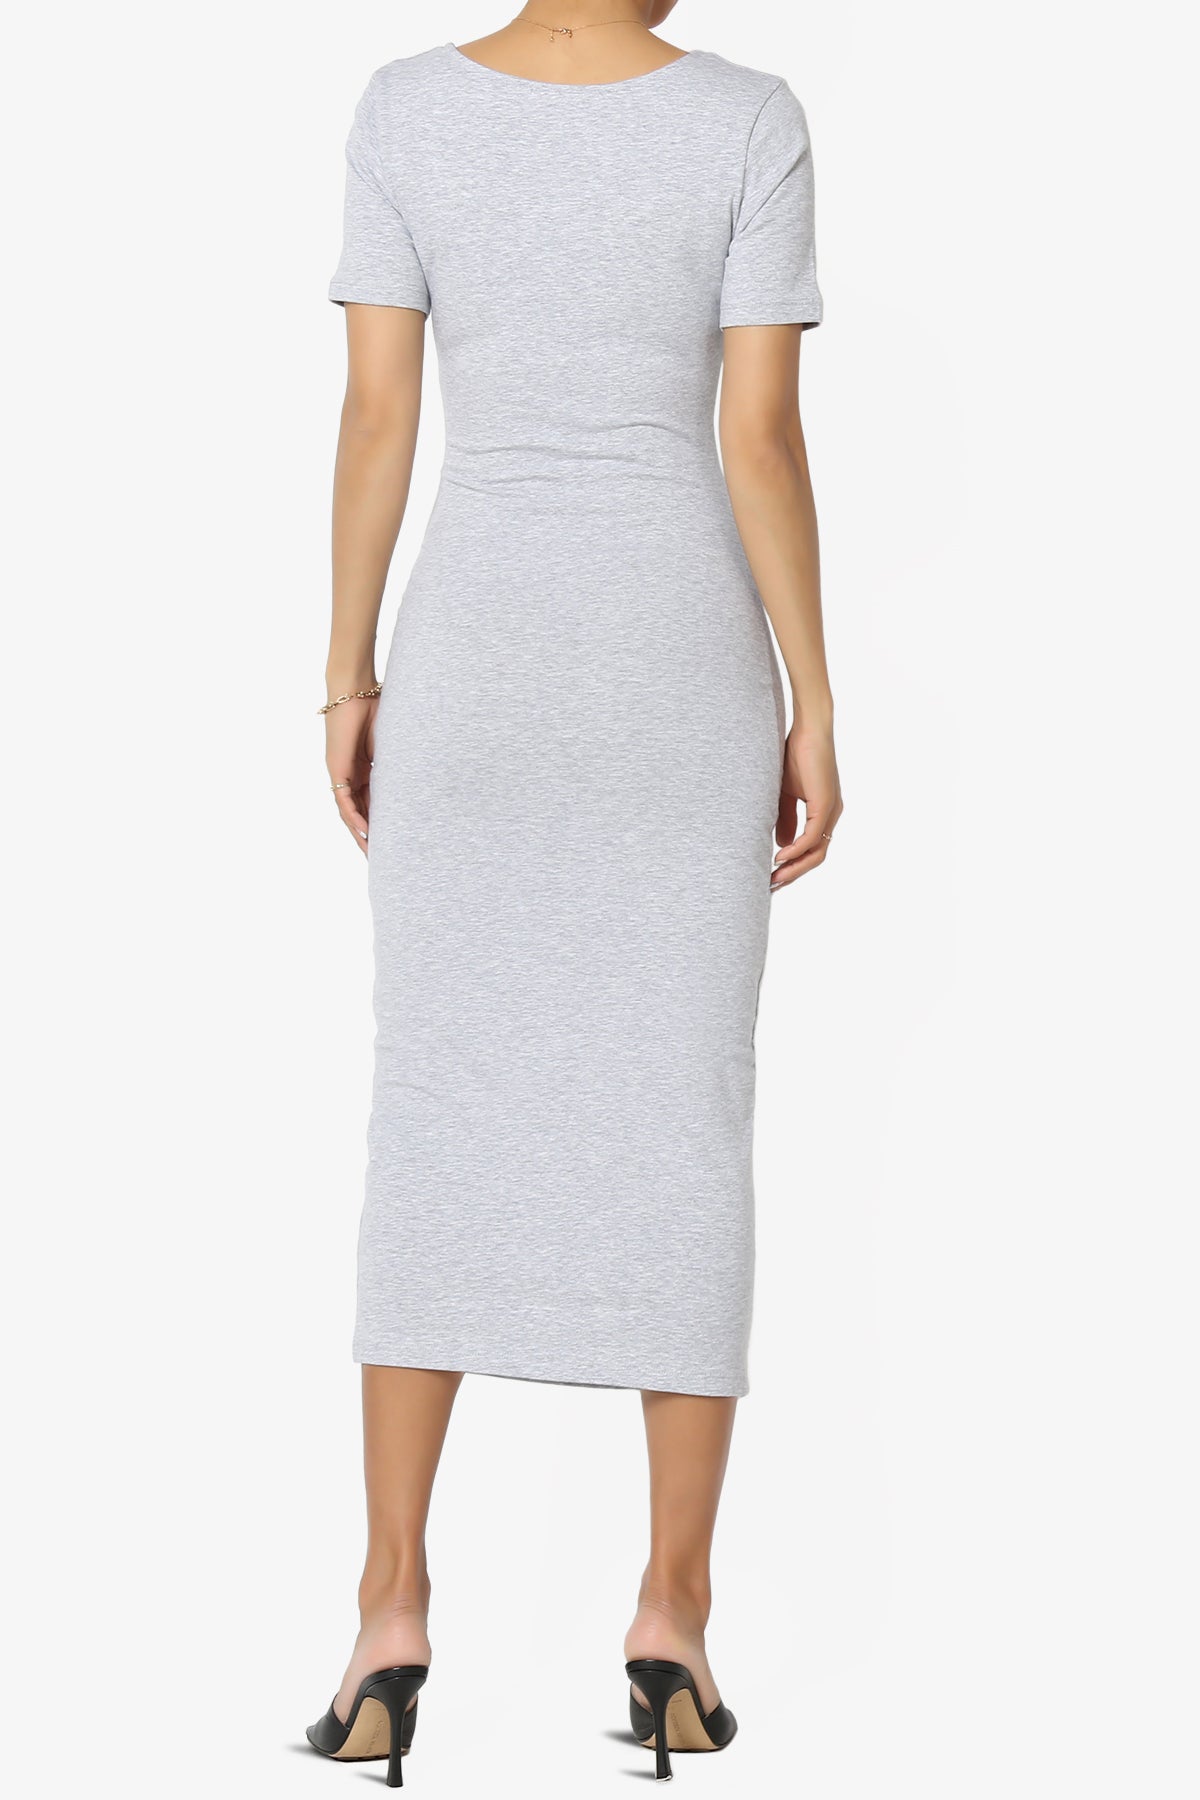 Load image into Gallery viewer, Fontella Short Sleeve Square Neck Bodycon Dress
